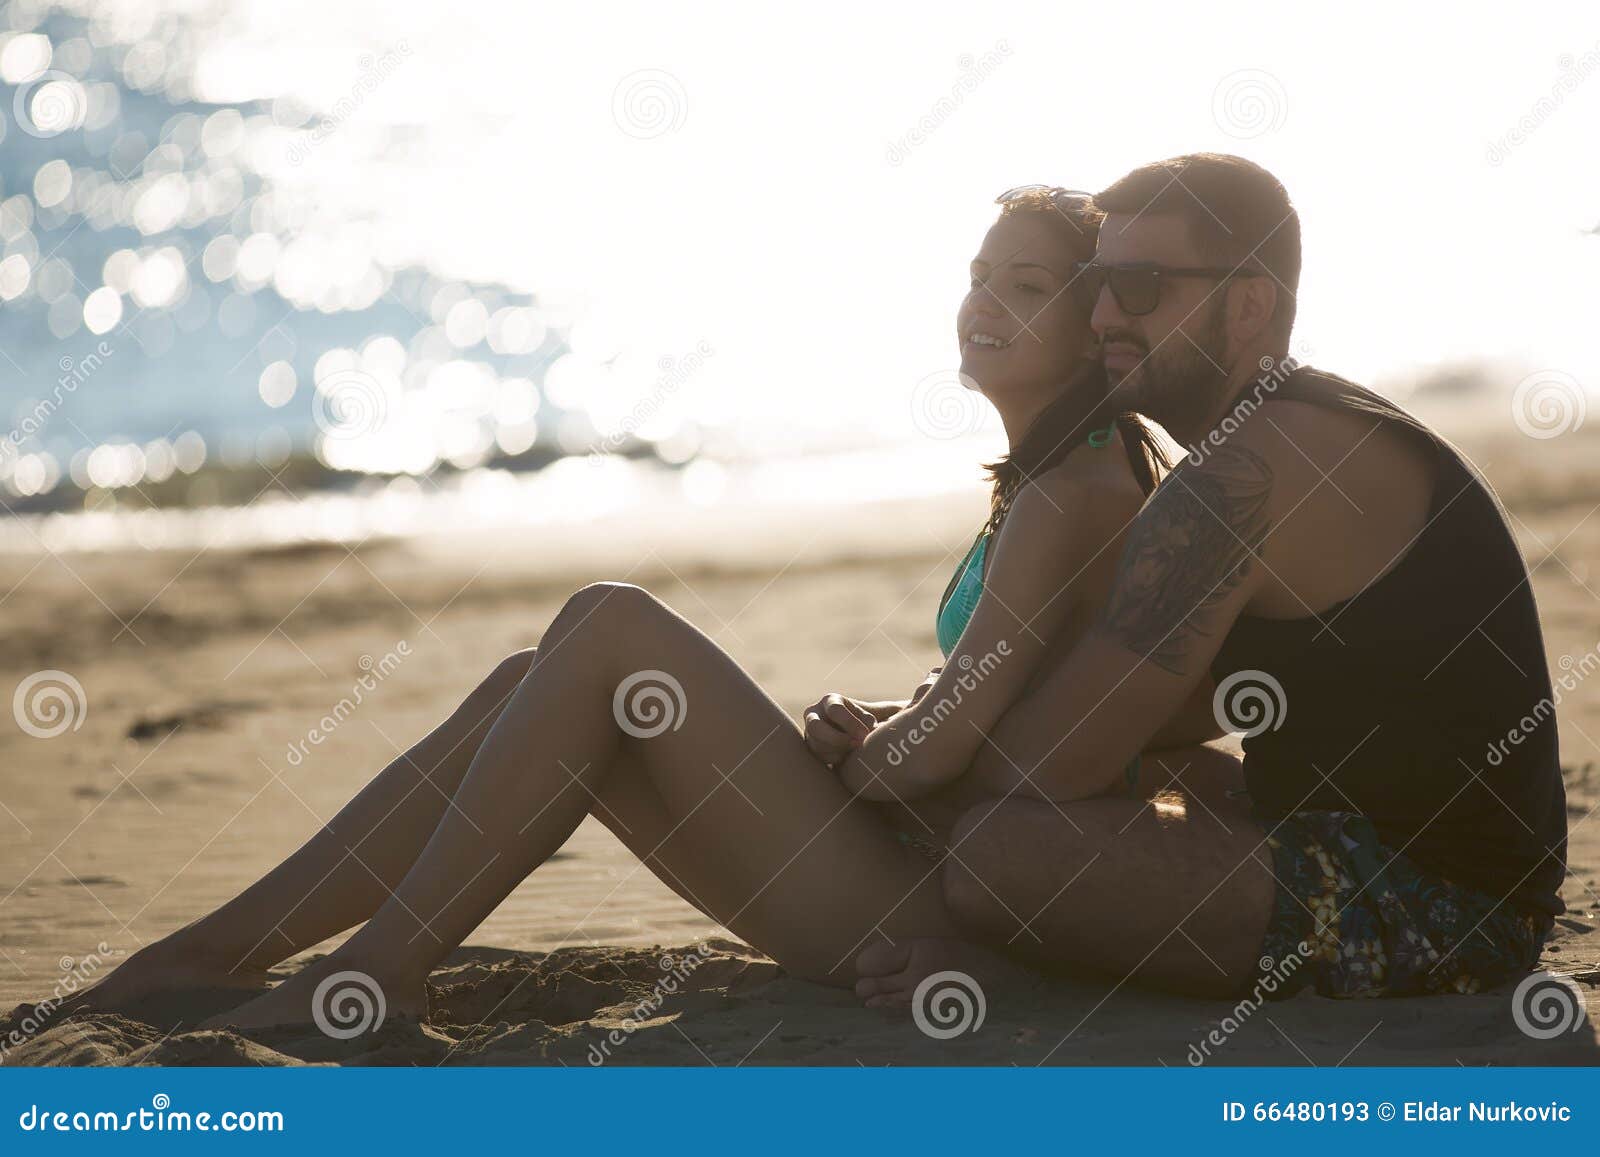 Romantic Couple in Hug Watching Sunrise/ Sunset Together.Young Man ...